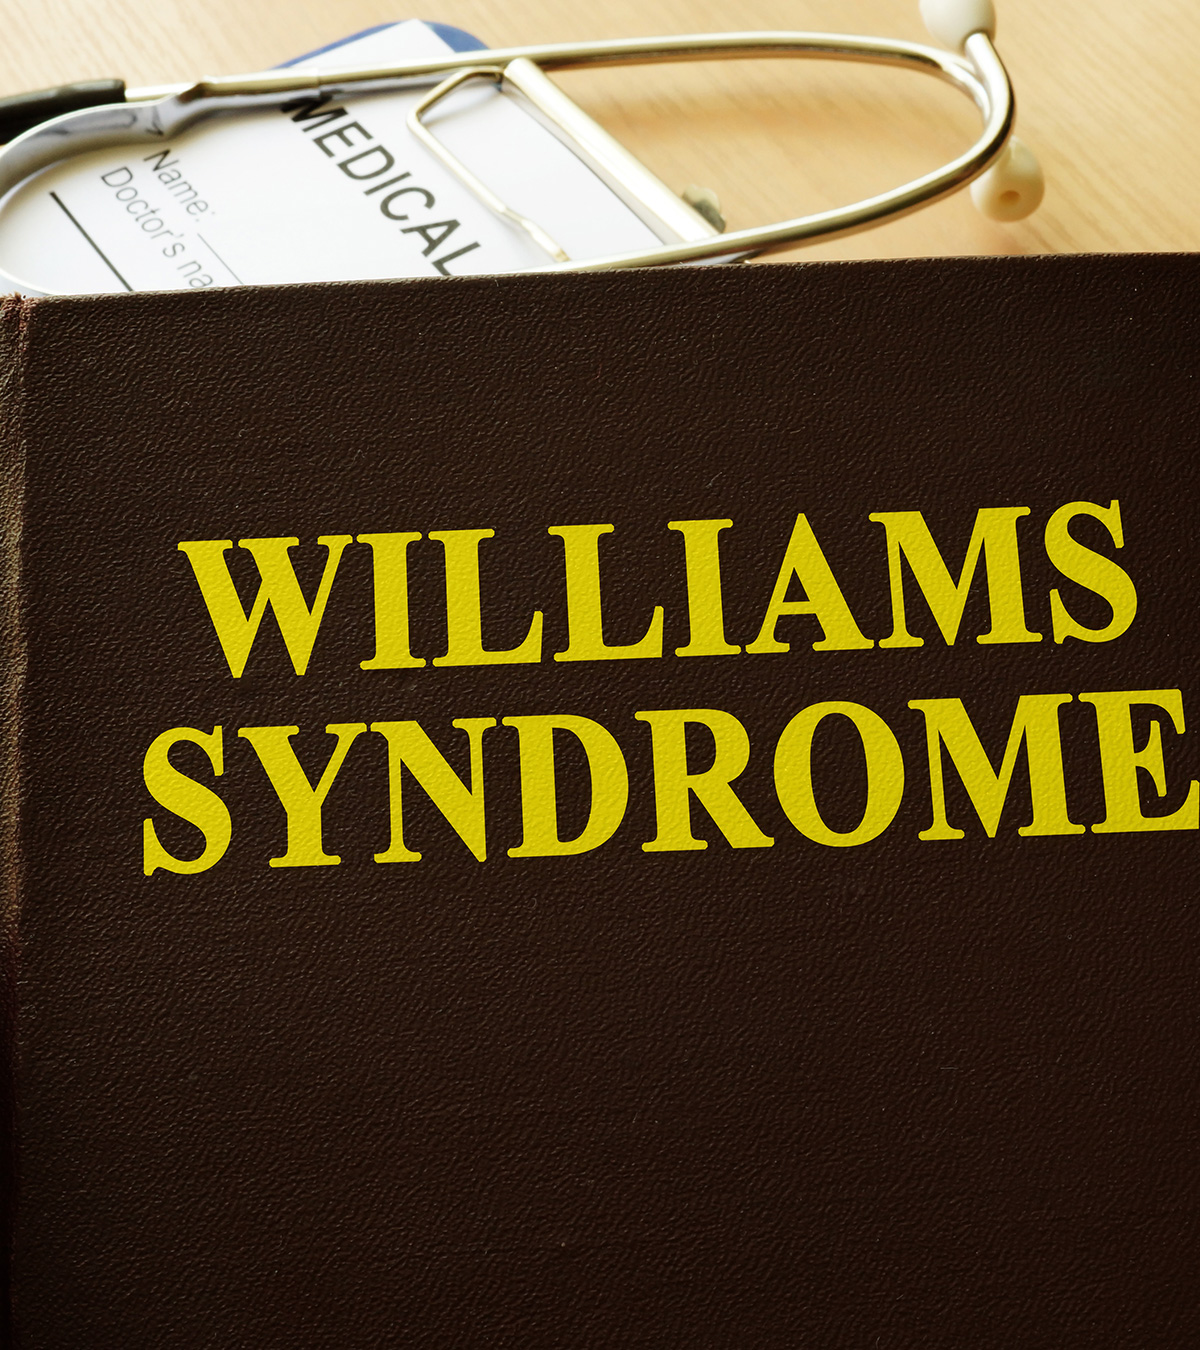 Williams Syndrome In Babies: Symptoms, Causes, And Treatment